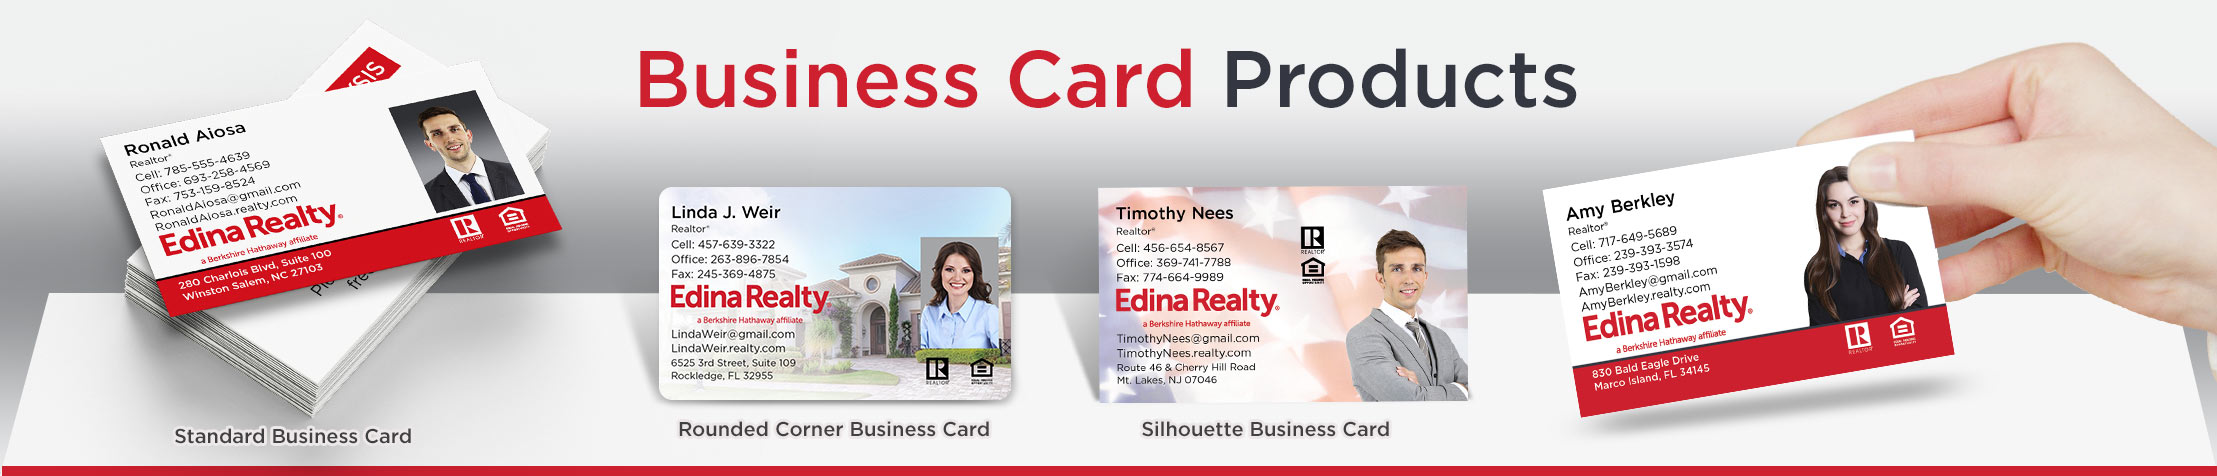 Edina Realty Real Estate Business Card Products - Edina Realty  - Unique, Custom Business Cards Printed on Quality Stock with Creative Designs for Realtors | BestPrintBuy.com